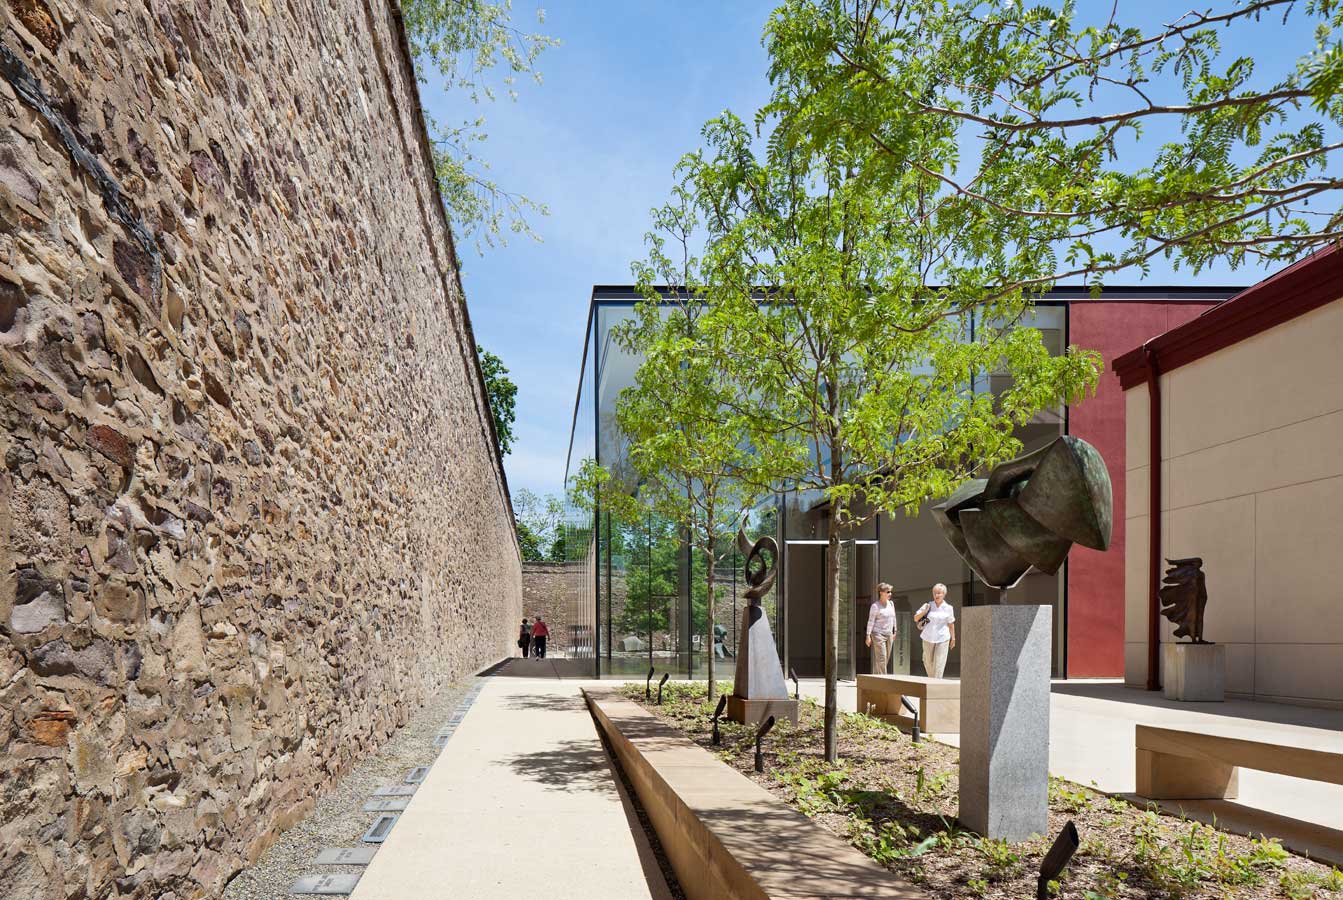 <p>The stone wall of the former prison appears to enter the space through the uninterrupted glass walls of the pavilion, lending visual interest and historical reference to the structure. <br><small>&copy; Michael Moran/OTTO</small></p>